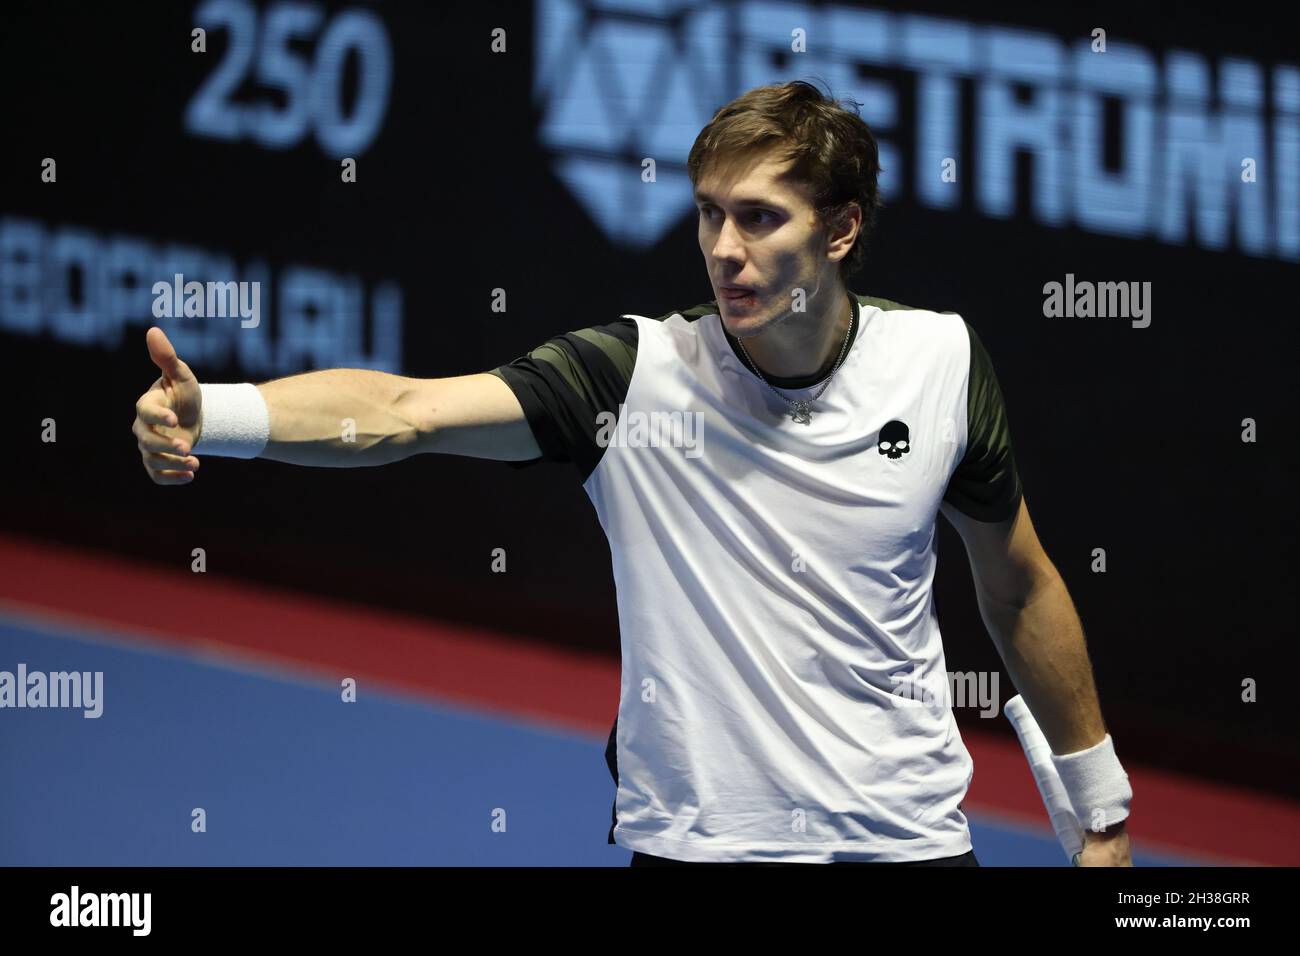 St. Petersburg, Russia. 26th Oct, 2021. Egor Gerasimov of Belarus seen in  action during a tennis match against Mackenzie McDonald of USA at the St.  Petersburg Open, 2021 tennis tournament at Sibur